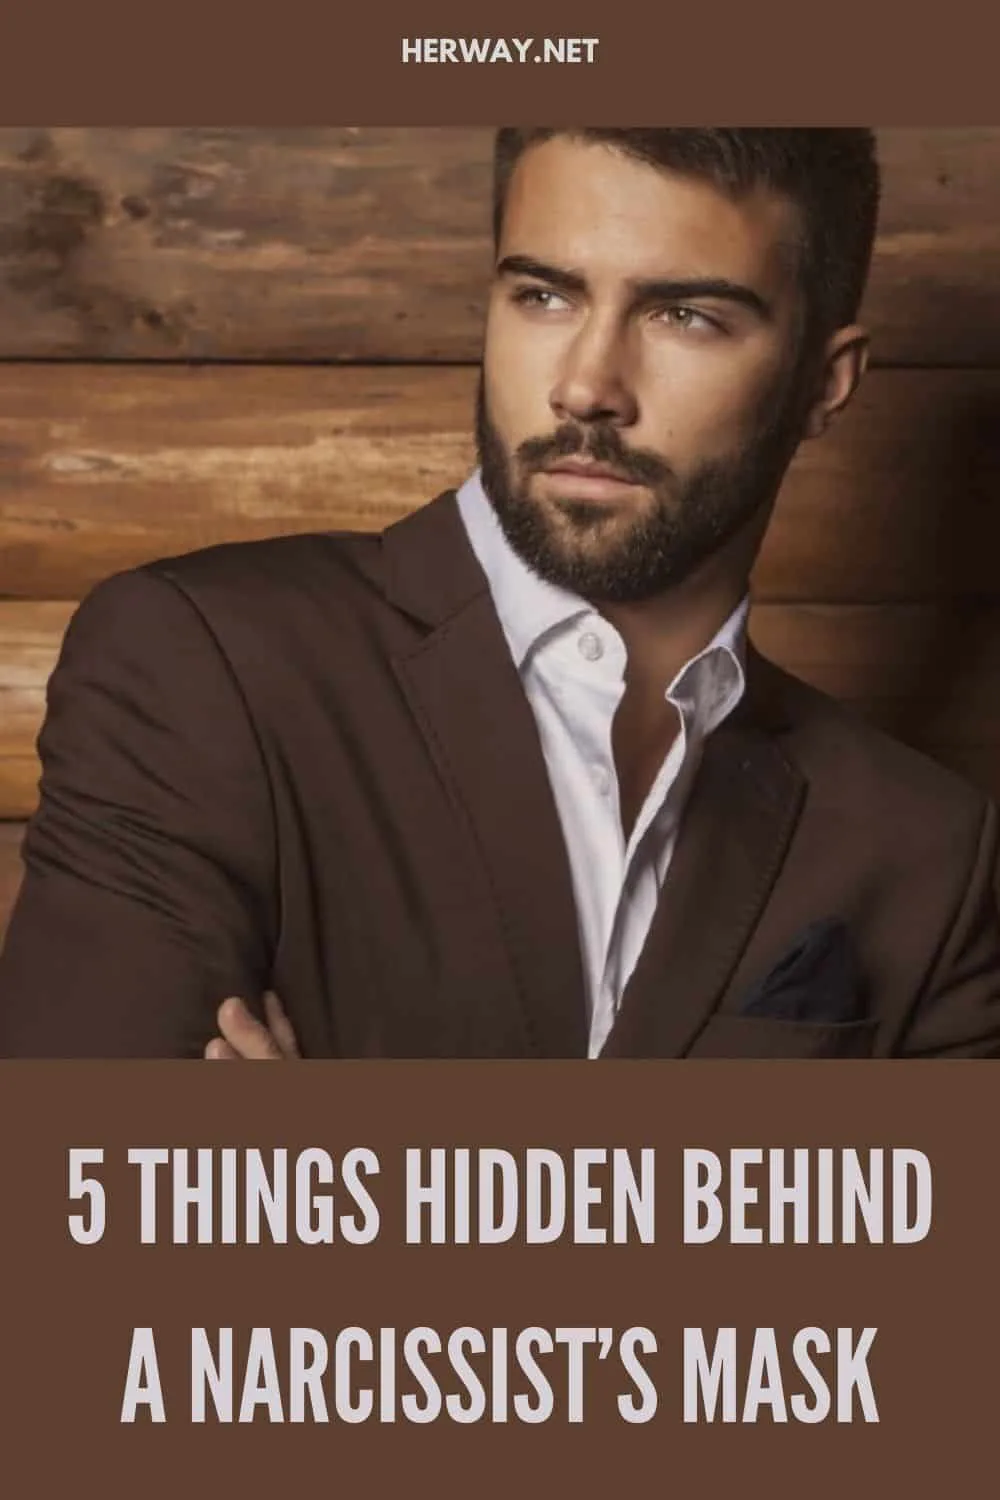 5 Things Hidden Behind A Narcissist’s Mask